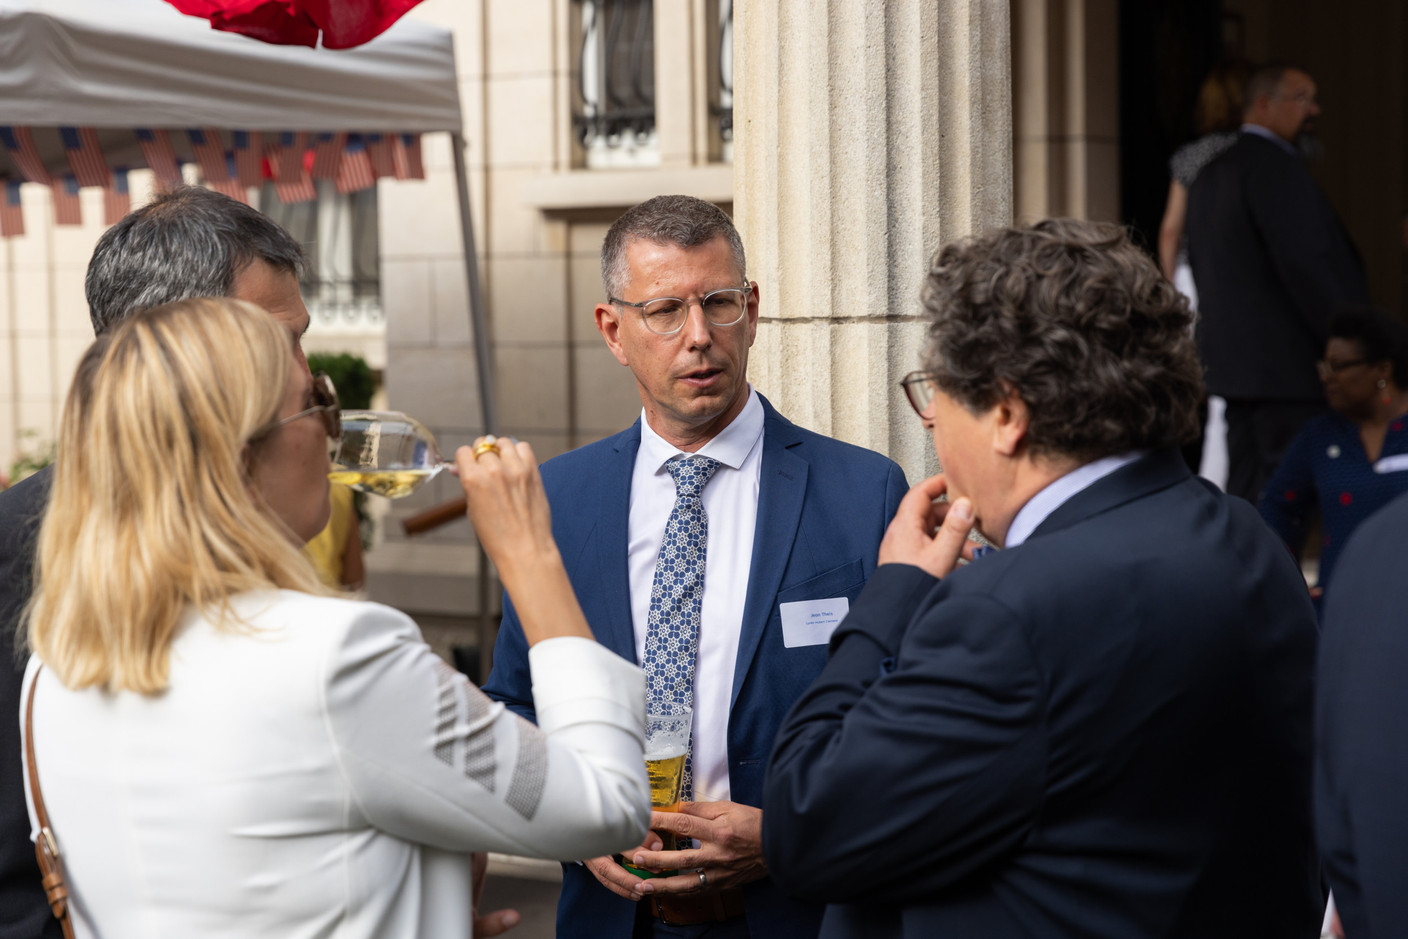 Guests at the US embassy reception on Wednesday 28 June. Photo: Romain Gamba/Maison Moderne